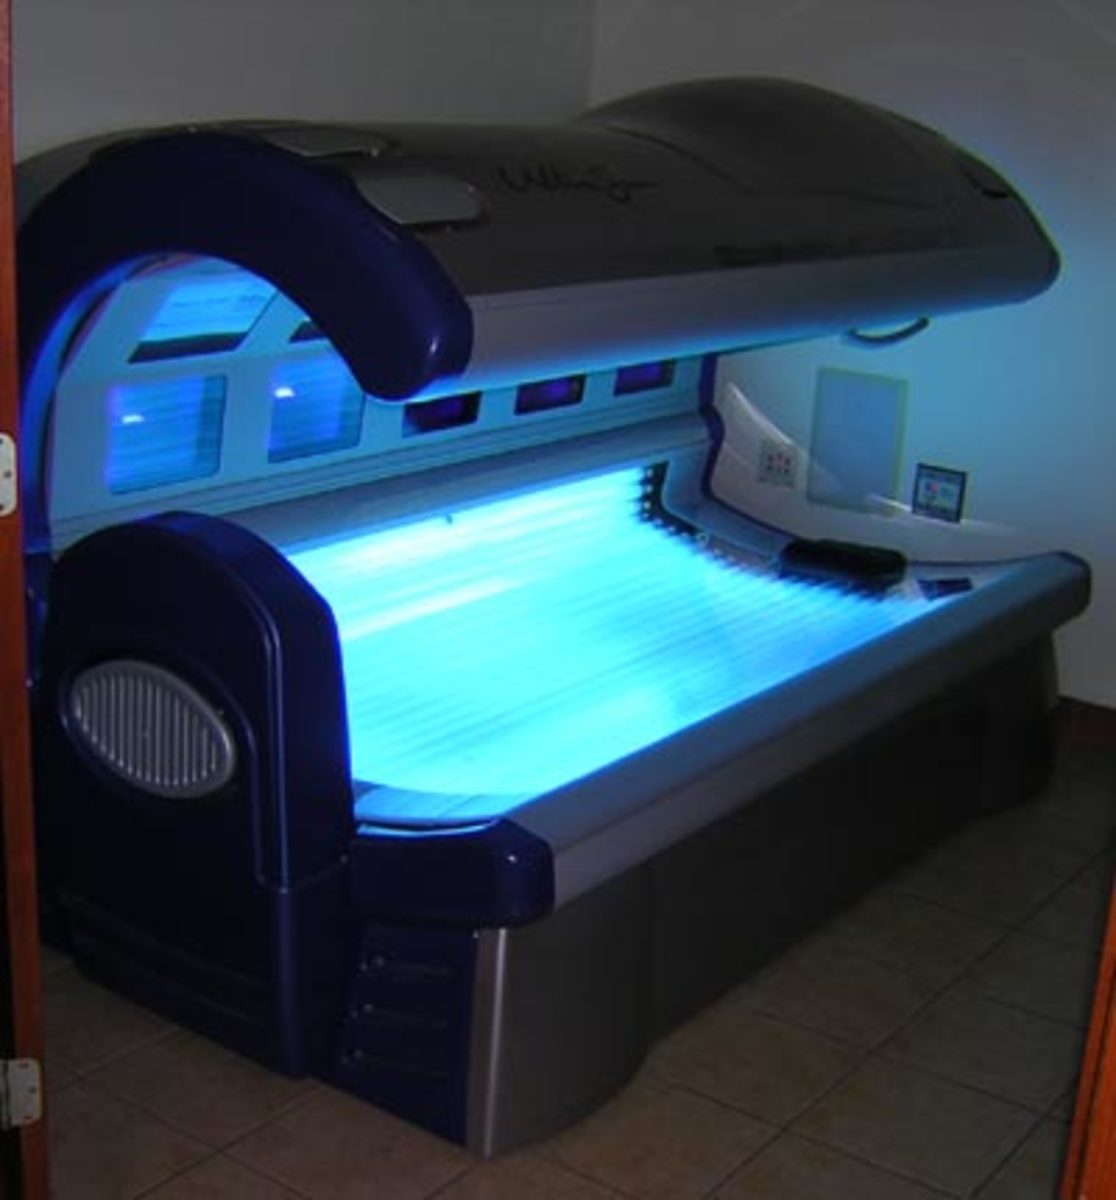 A commercial tanning bed.